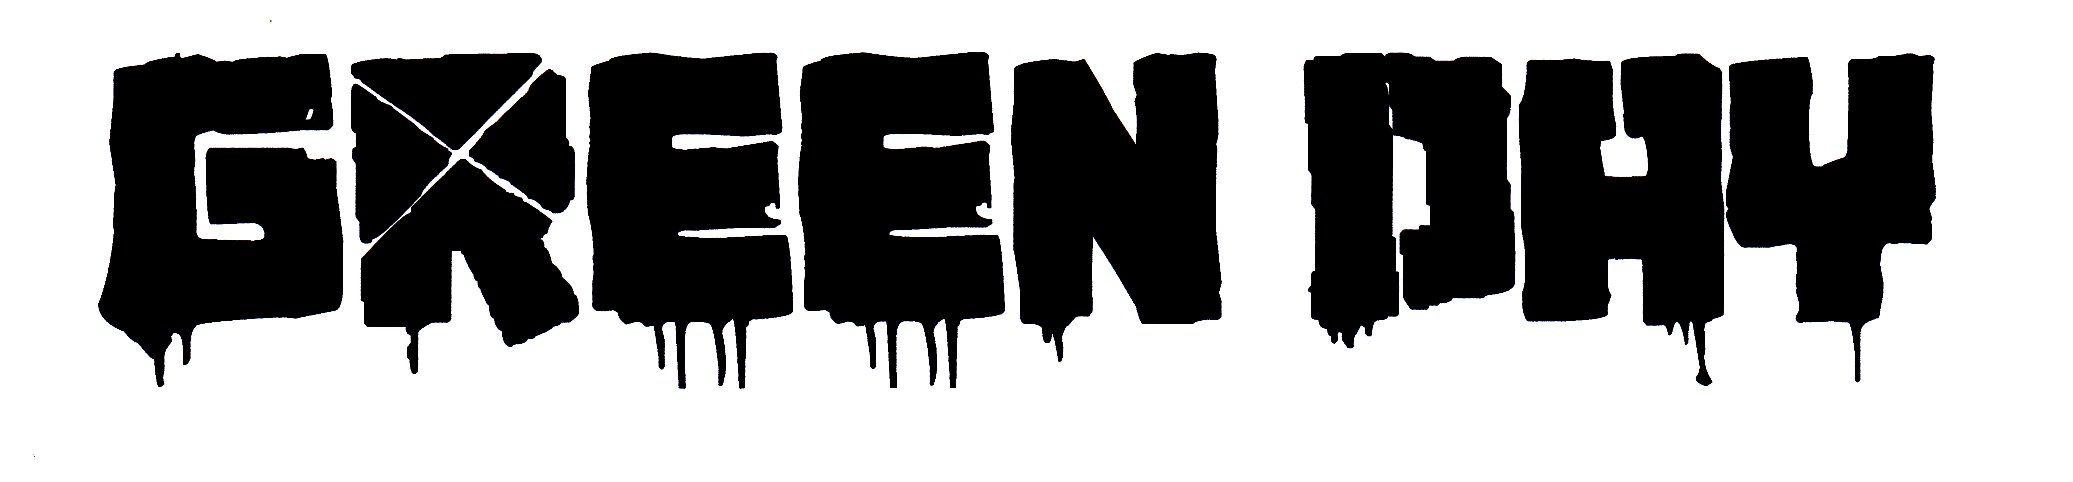 Greenday Black And White Logo - Ancillary Research: Band's Logo Research. A2 Media Studies Blog